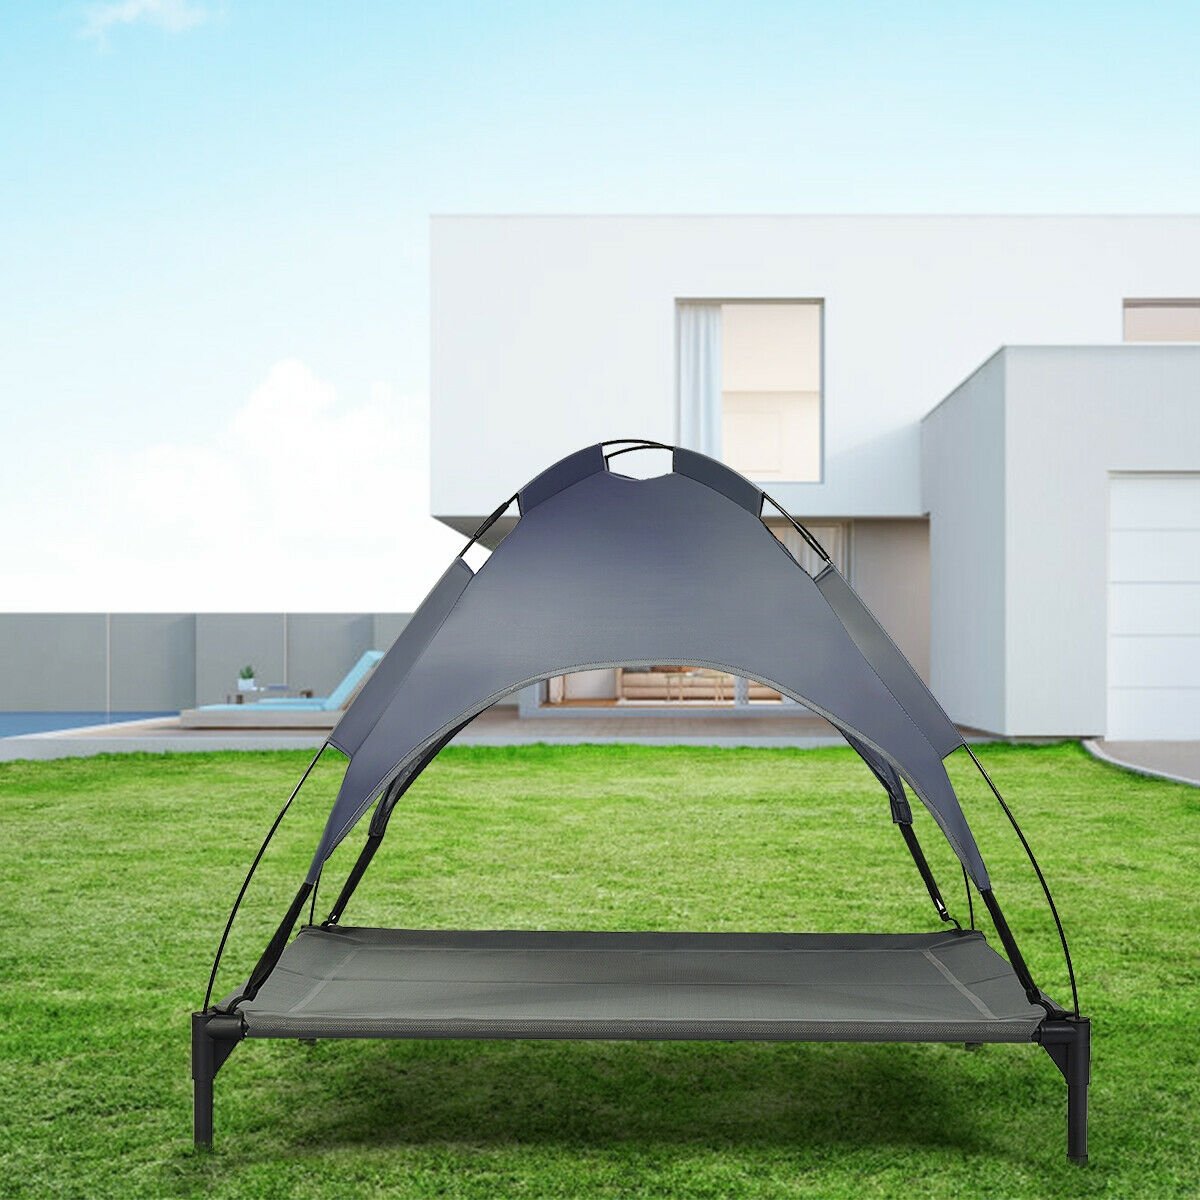 Portable Elevated Outdoor Pet Bed with Removable Canopy Shade-42 Inch, Dark Gray - Gallery Canada